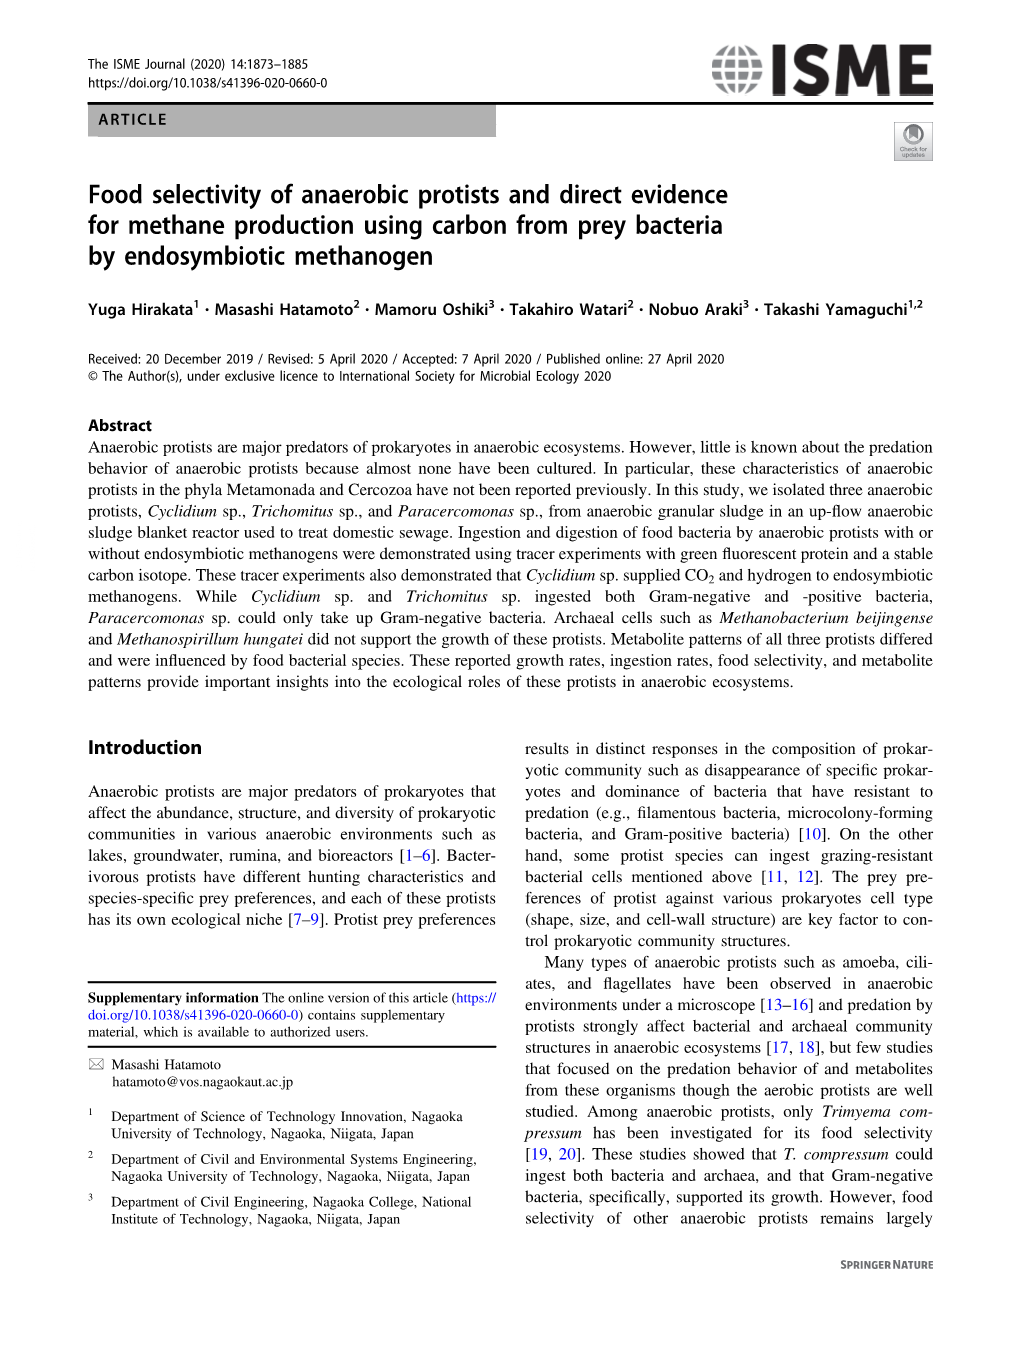 Food Selectivity of Anaerobic Protists and Direct Evidence for Methane Production Using Carbon from Prey Bacteria by Endosymbiotic Methanogen